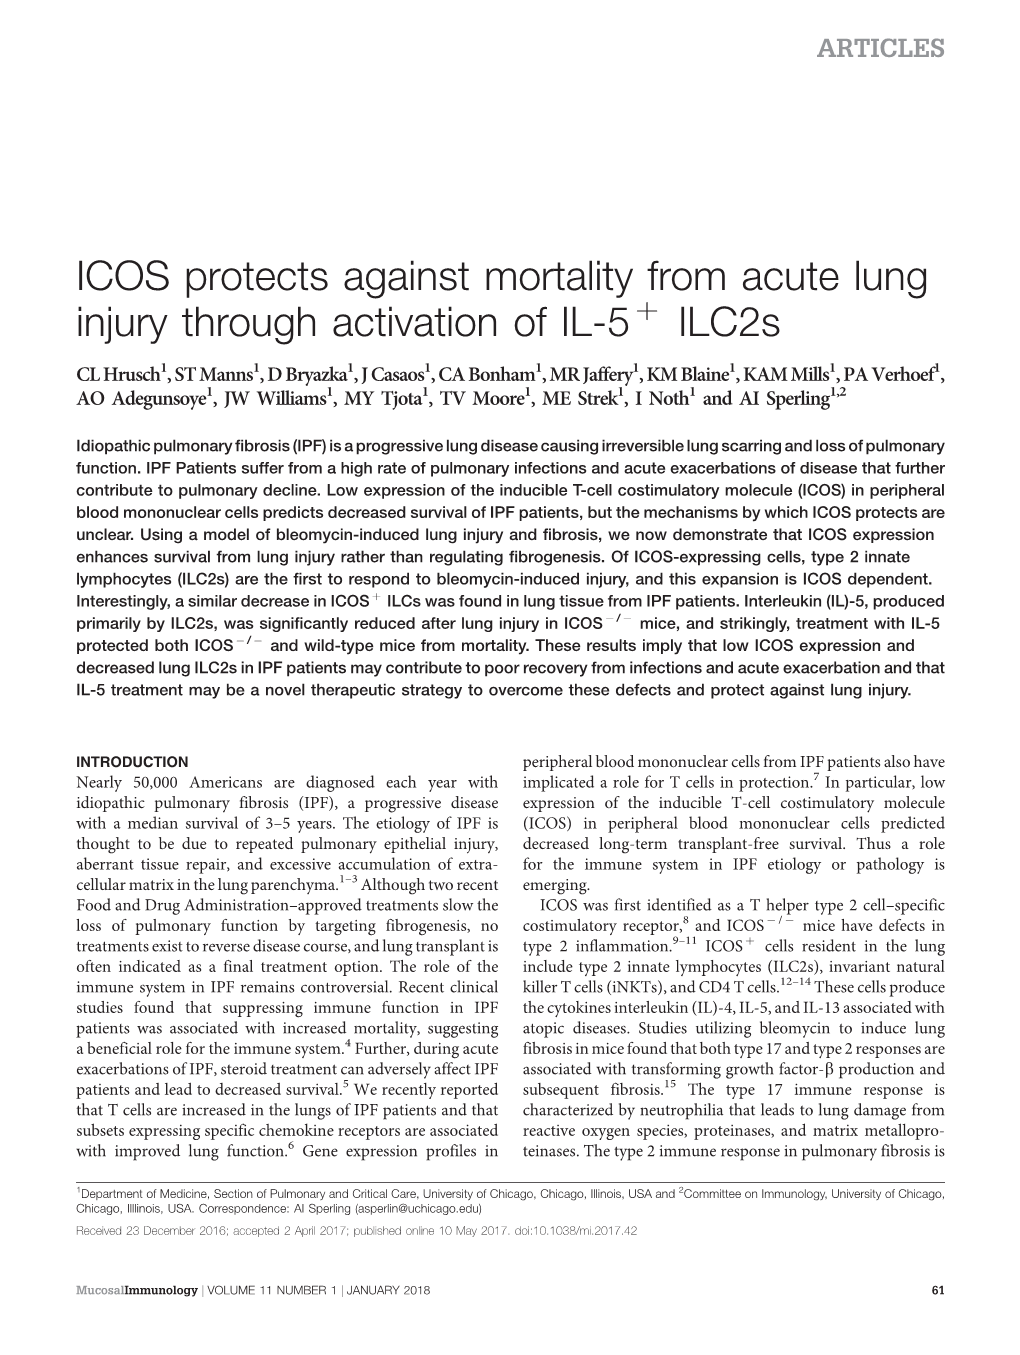 ICOS Protects Against Mortality from Acute Lung Injury Through Activation of IL-5 Þ Ilc2s